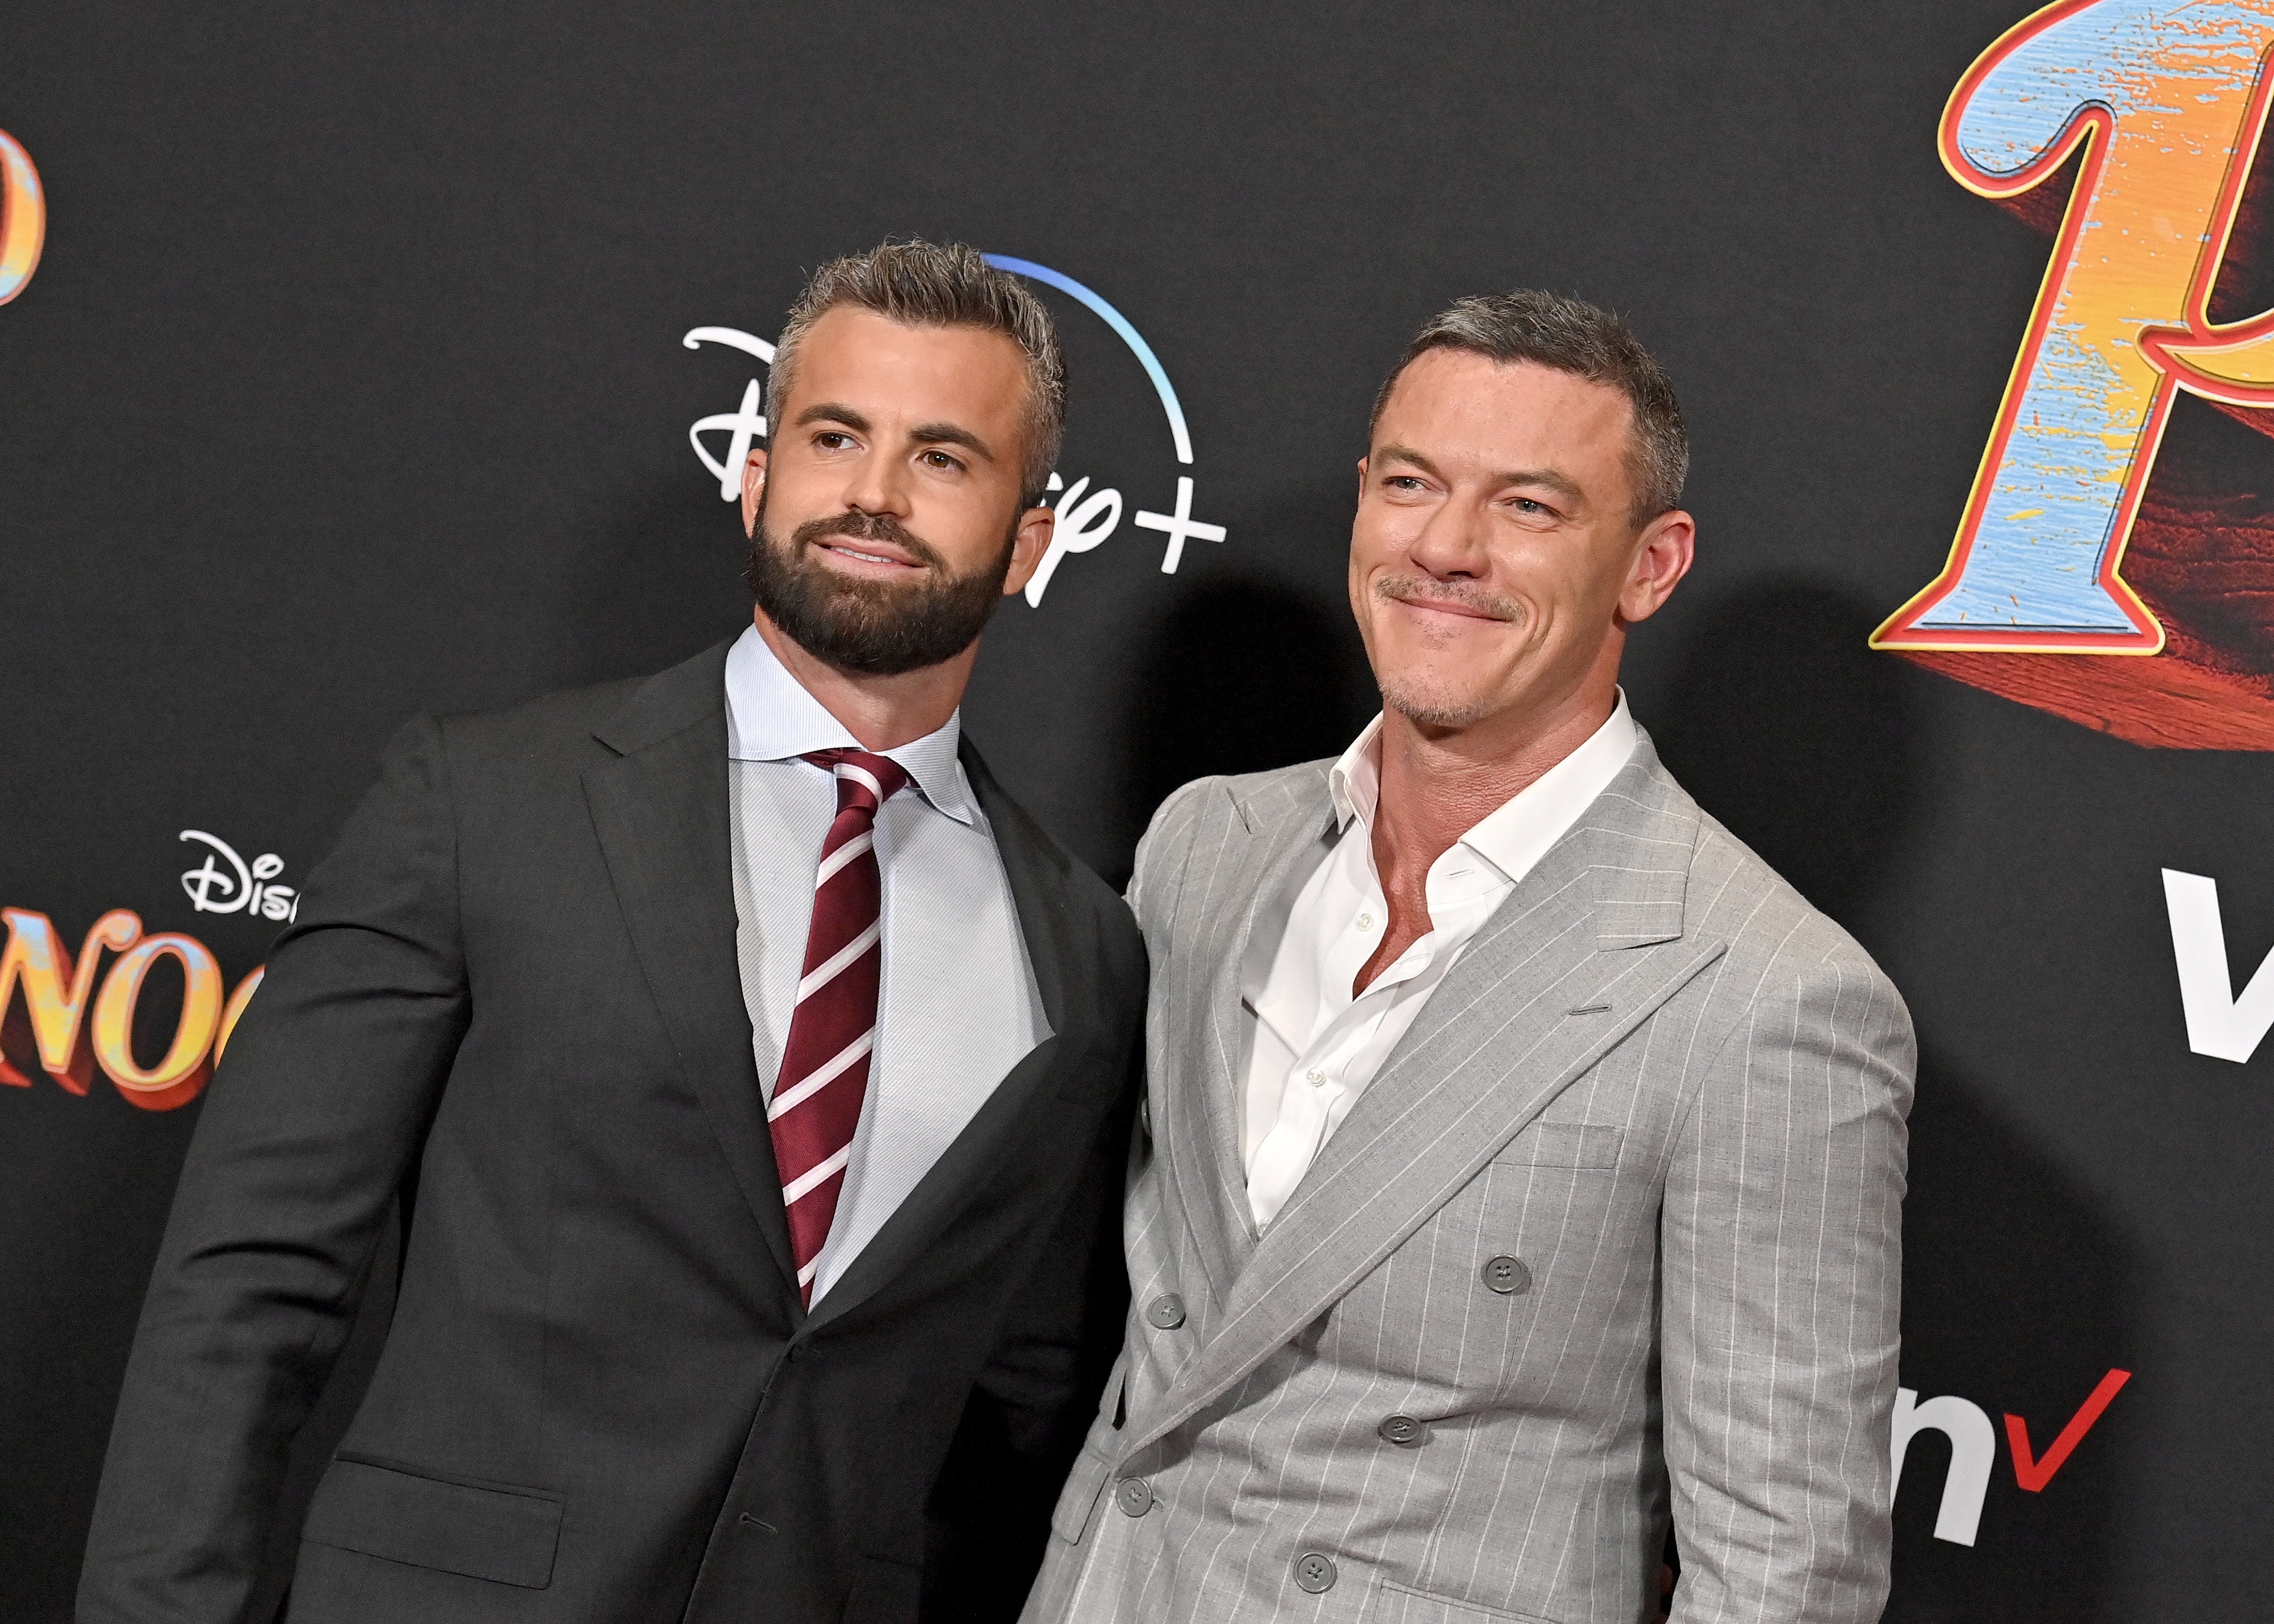 Fran Tomas and Luke Evans attend the World Premiere of Disney's "Pinocchio" in September 2022 in Burbank, California. | Source: Getty Images